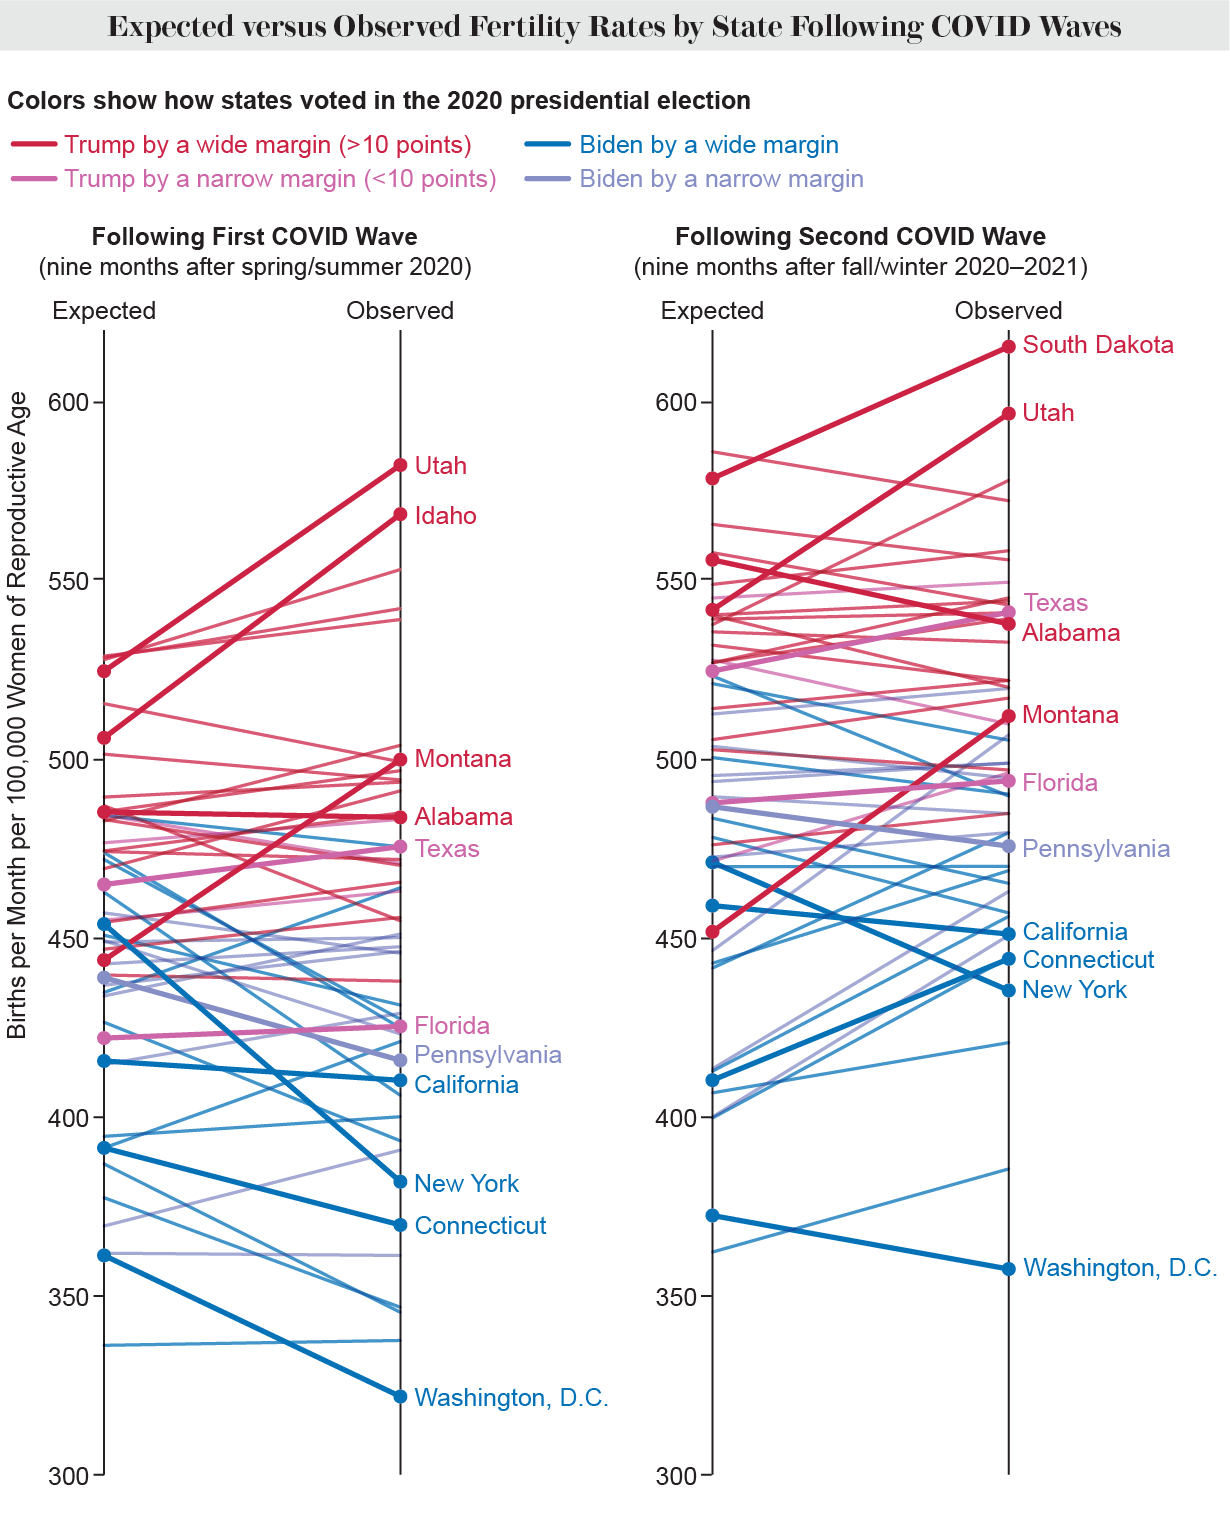 Slope charts show expected and observed fertility rates by US state following first and second COVID waves.  Lines are color coded to show political leanings based on how each state voted in the 2020 presidential election.